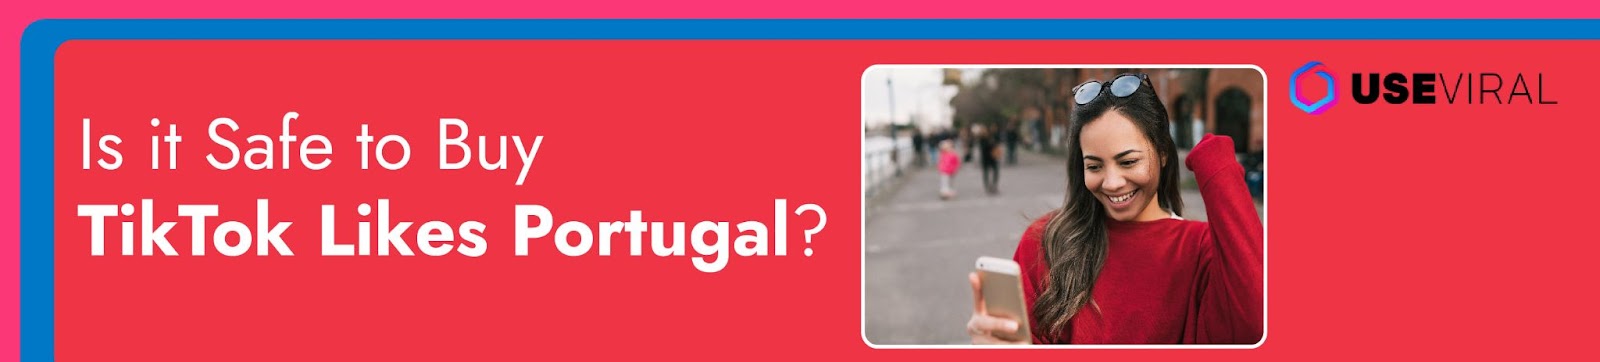 Is it safe to purchase TikTok likes Portugal?